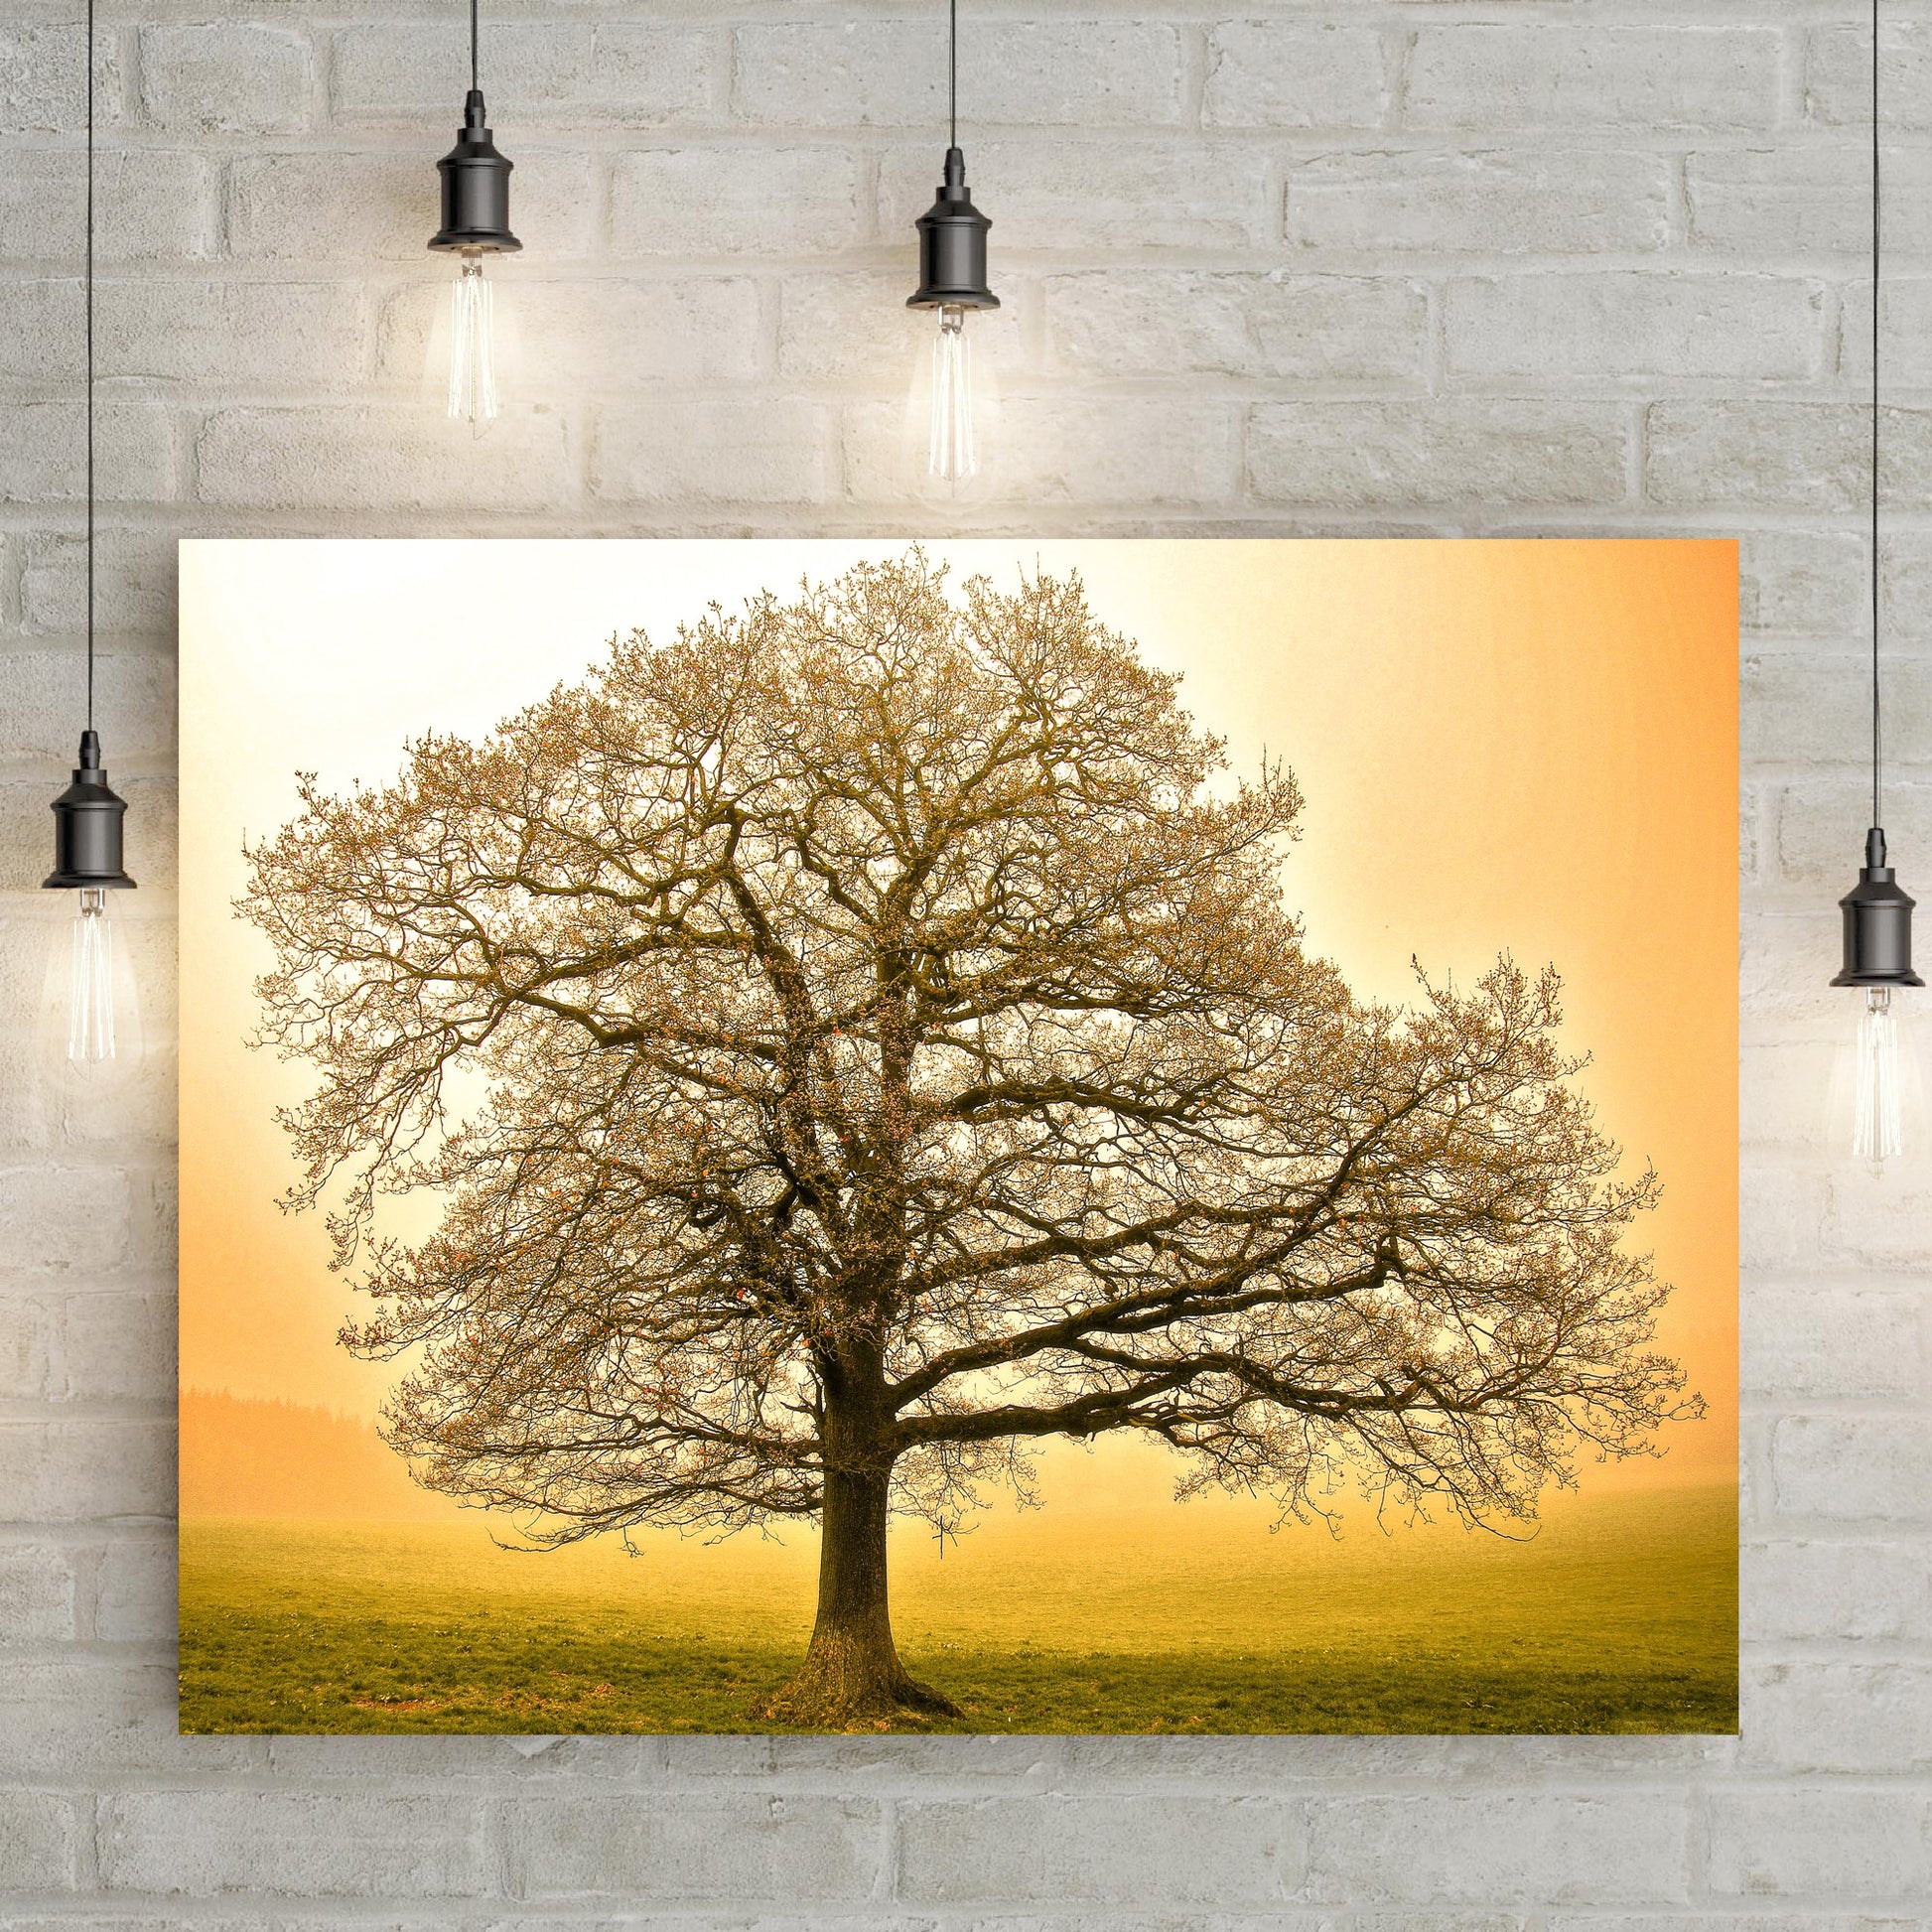 Golden Oak Tree Canvas Wall Art - Image by Tailored Canvases